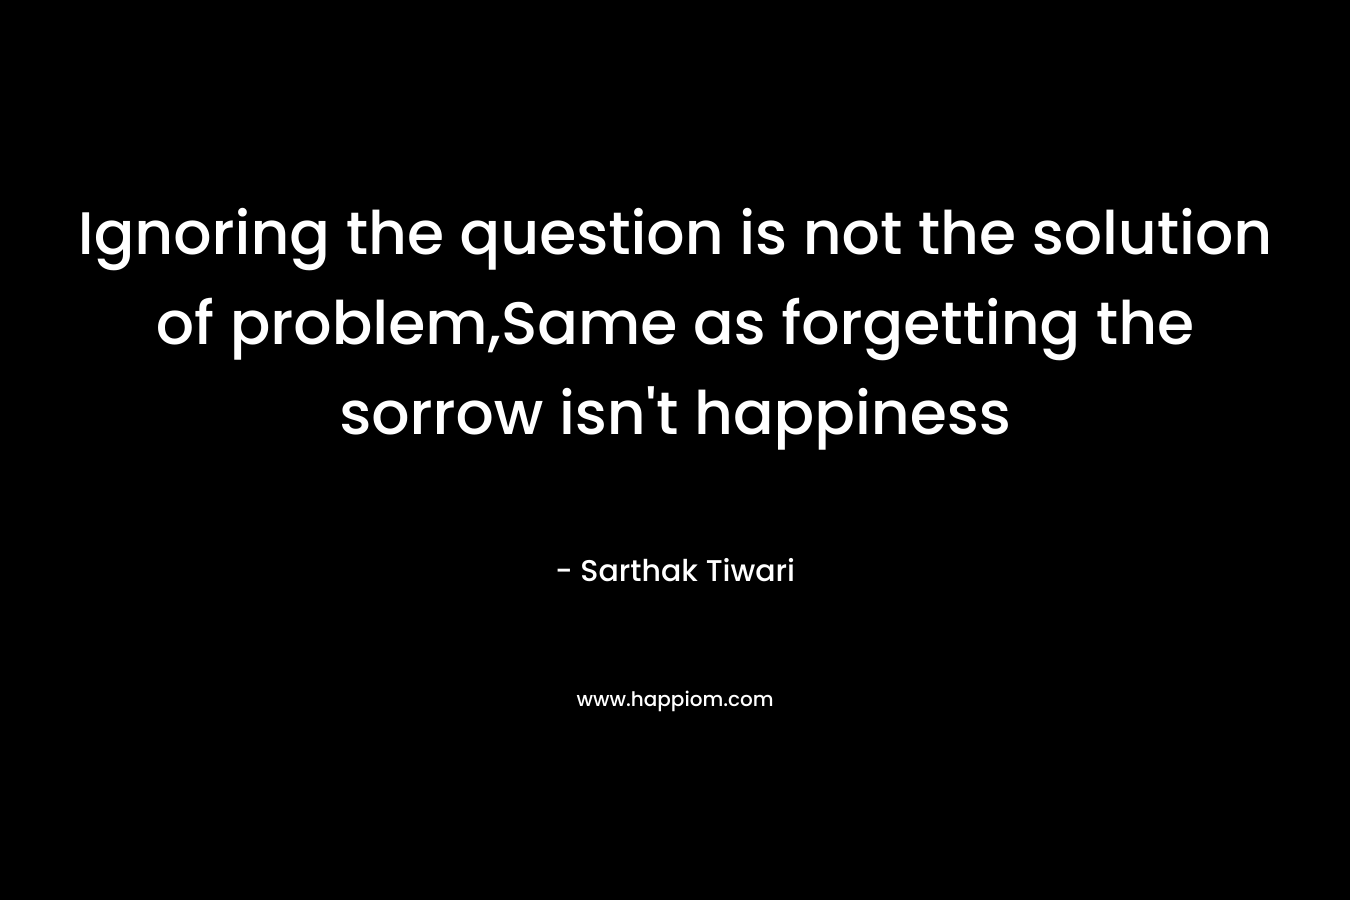 Ignoring the question is not the solution of problem,Same as forgetting the sorrow isn't happiness